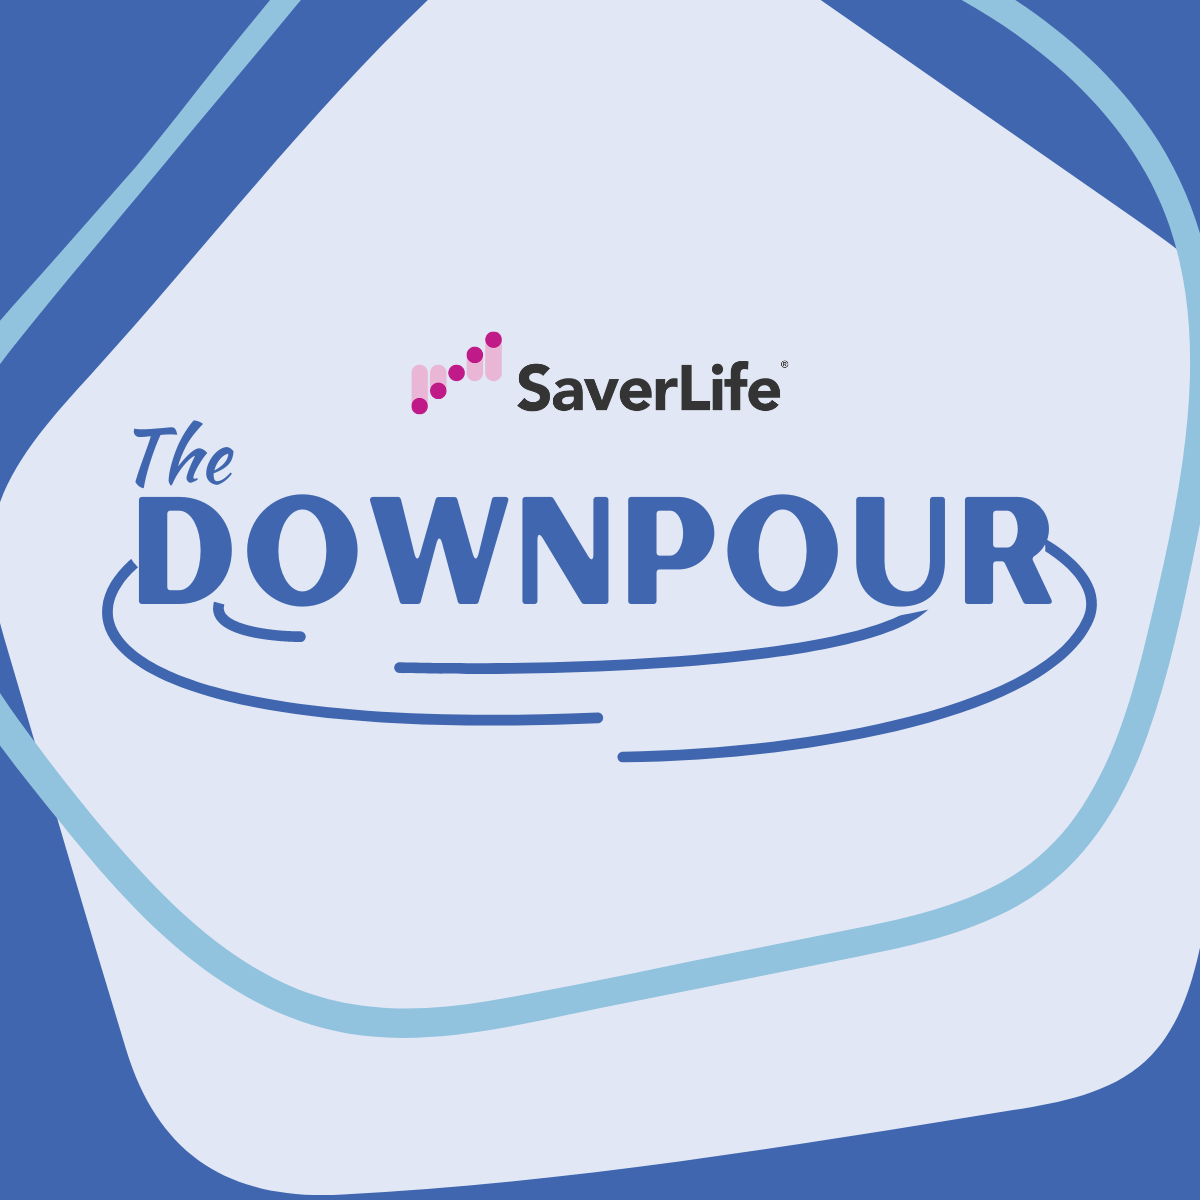 SaverLife The Downpour logo